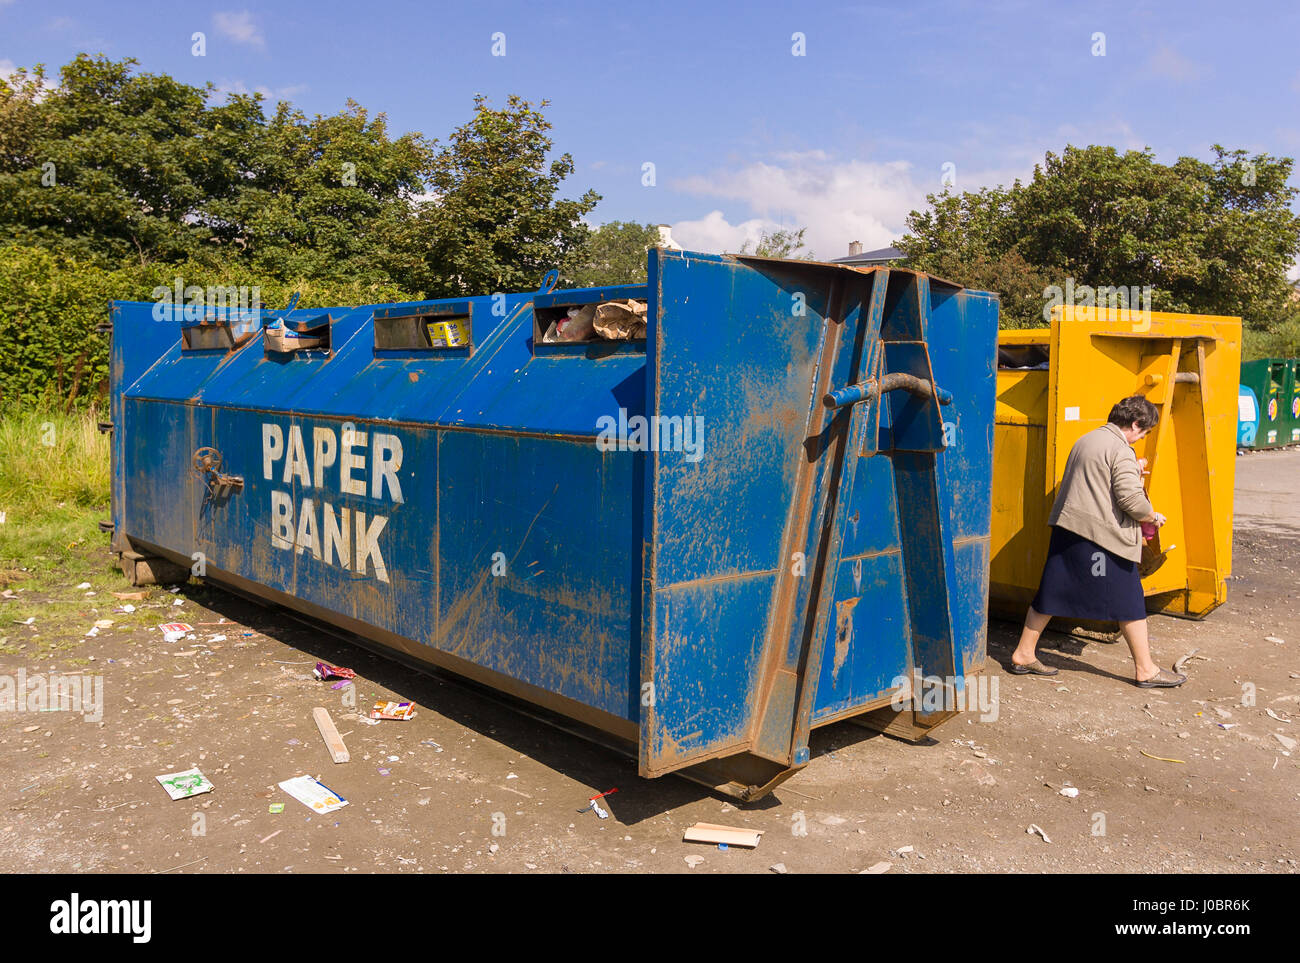 DONEGAL, IRELAND - Recycling bins. Stock Photo